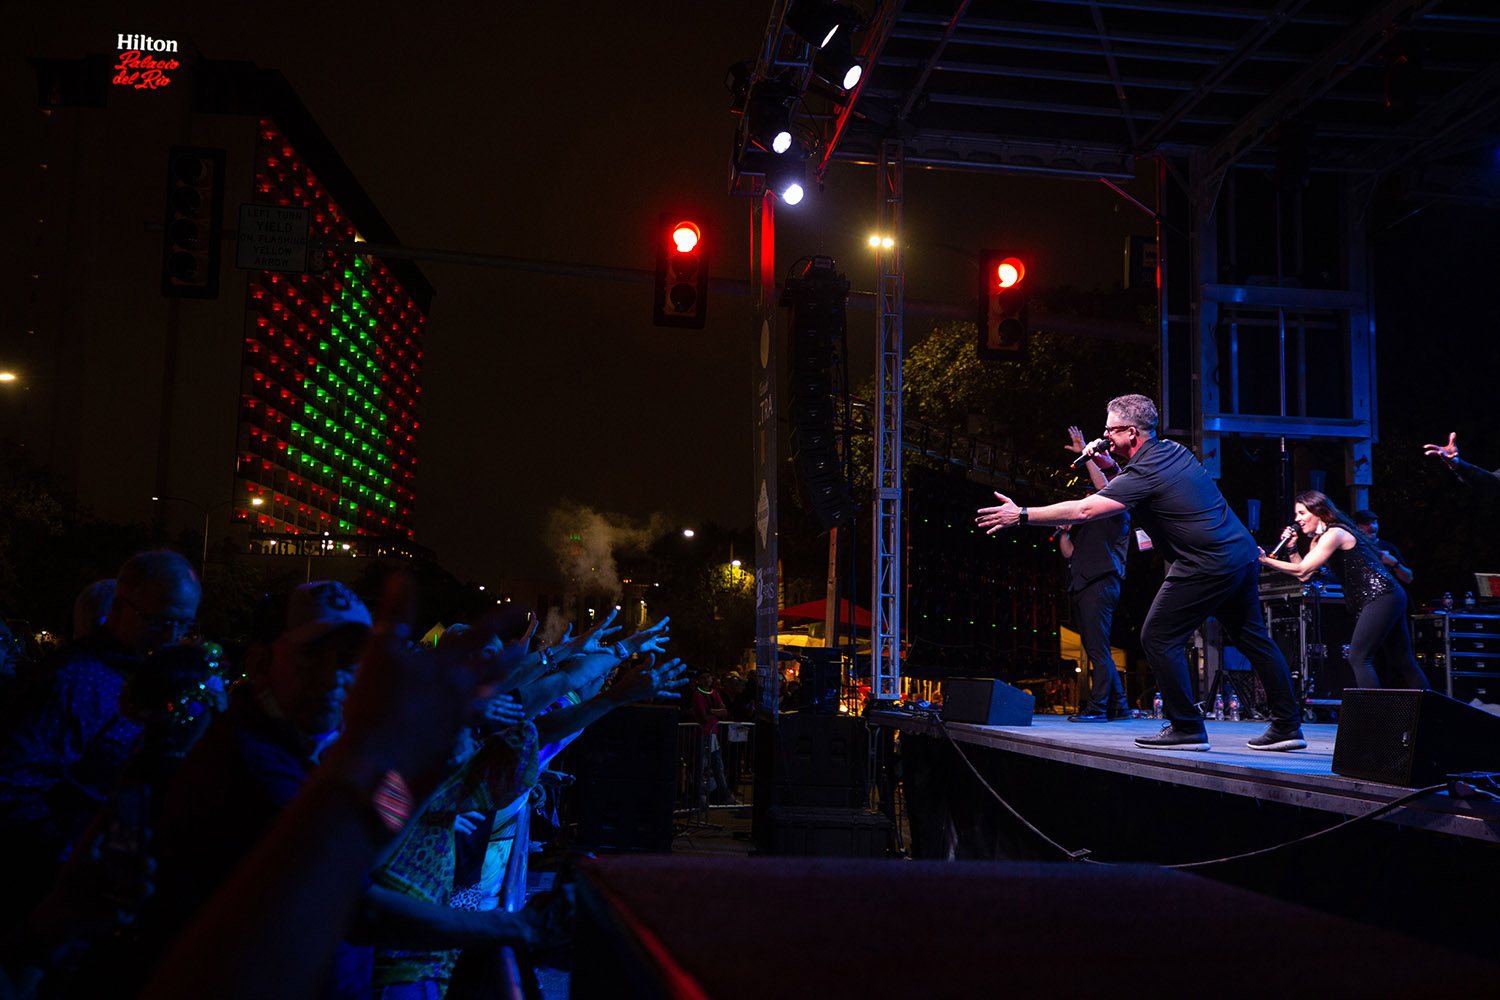 Thousands of people attended the Celebrate SA — the city’s official New Year’s Eve gathering in downtown on Dec. 31, 2021. Dozens of food vendors were set up between a couple of music stages and classic fair games. (Kaylee Greenlee / San Antonio Heron)